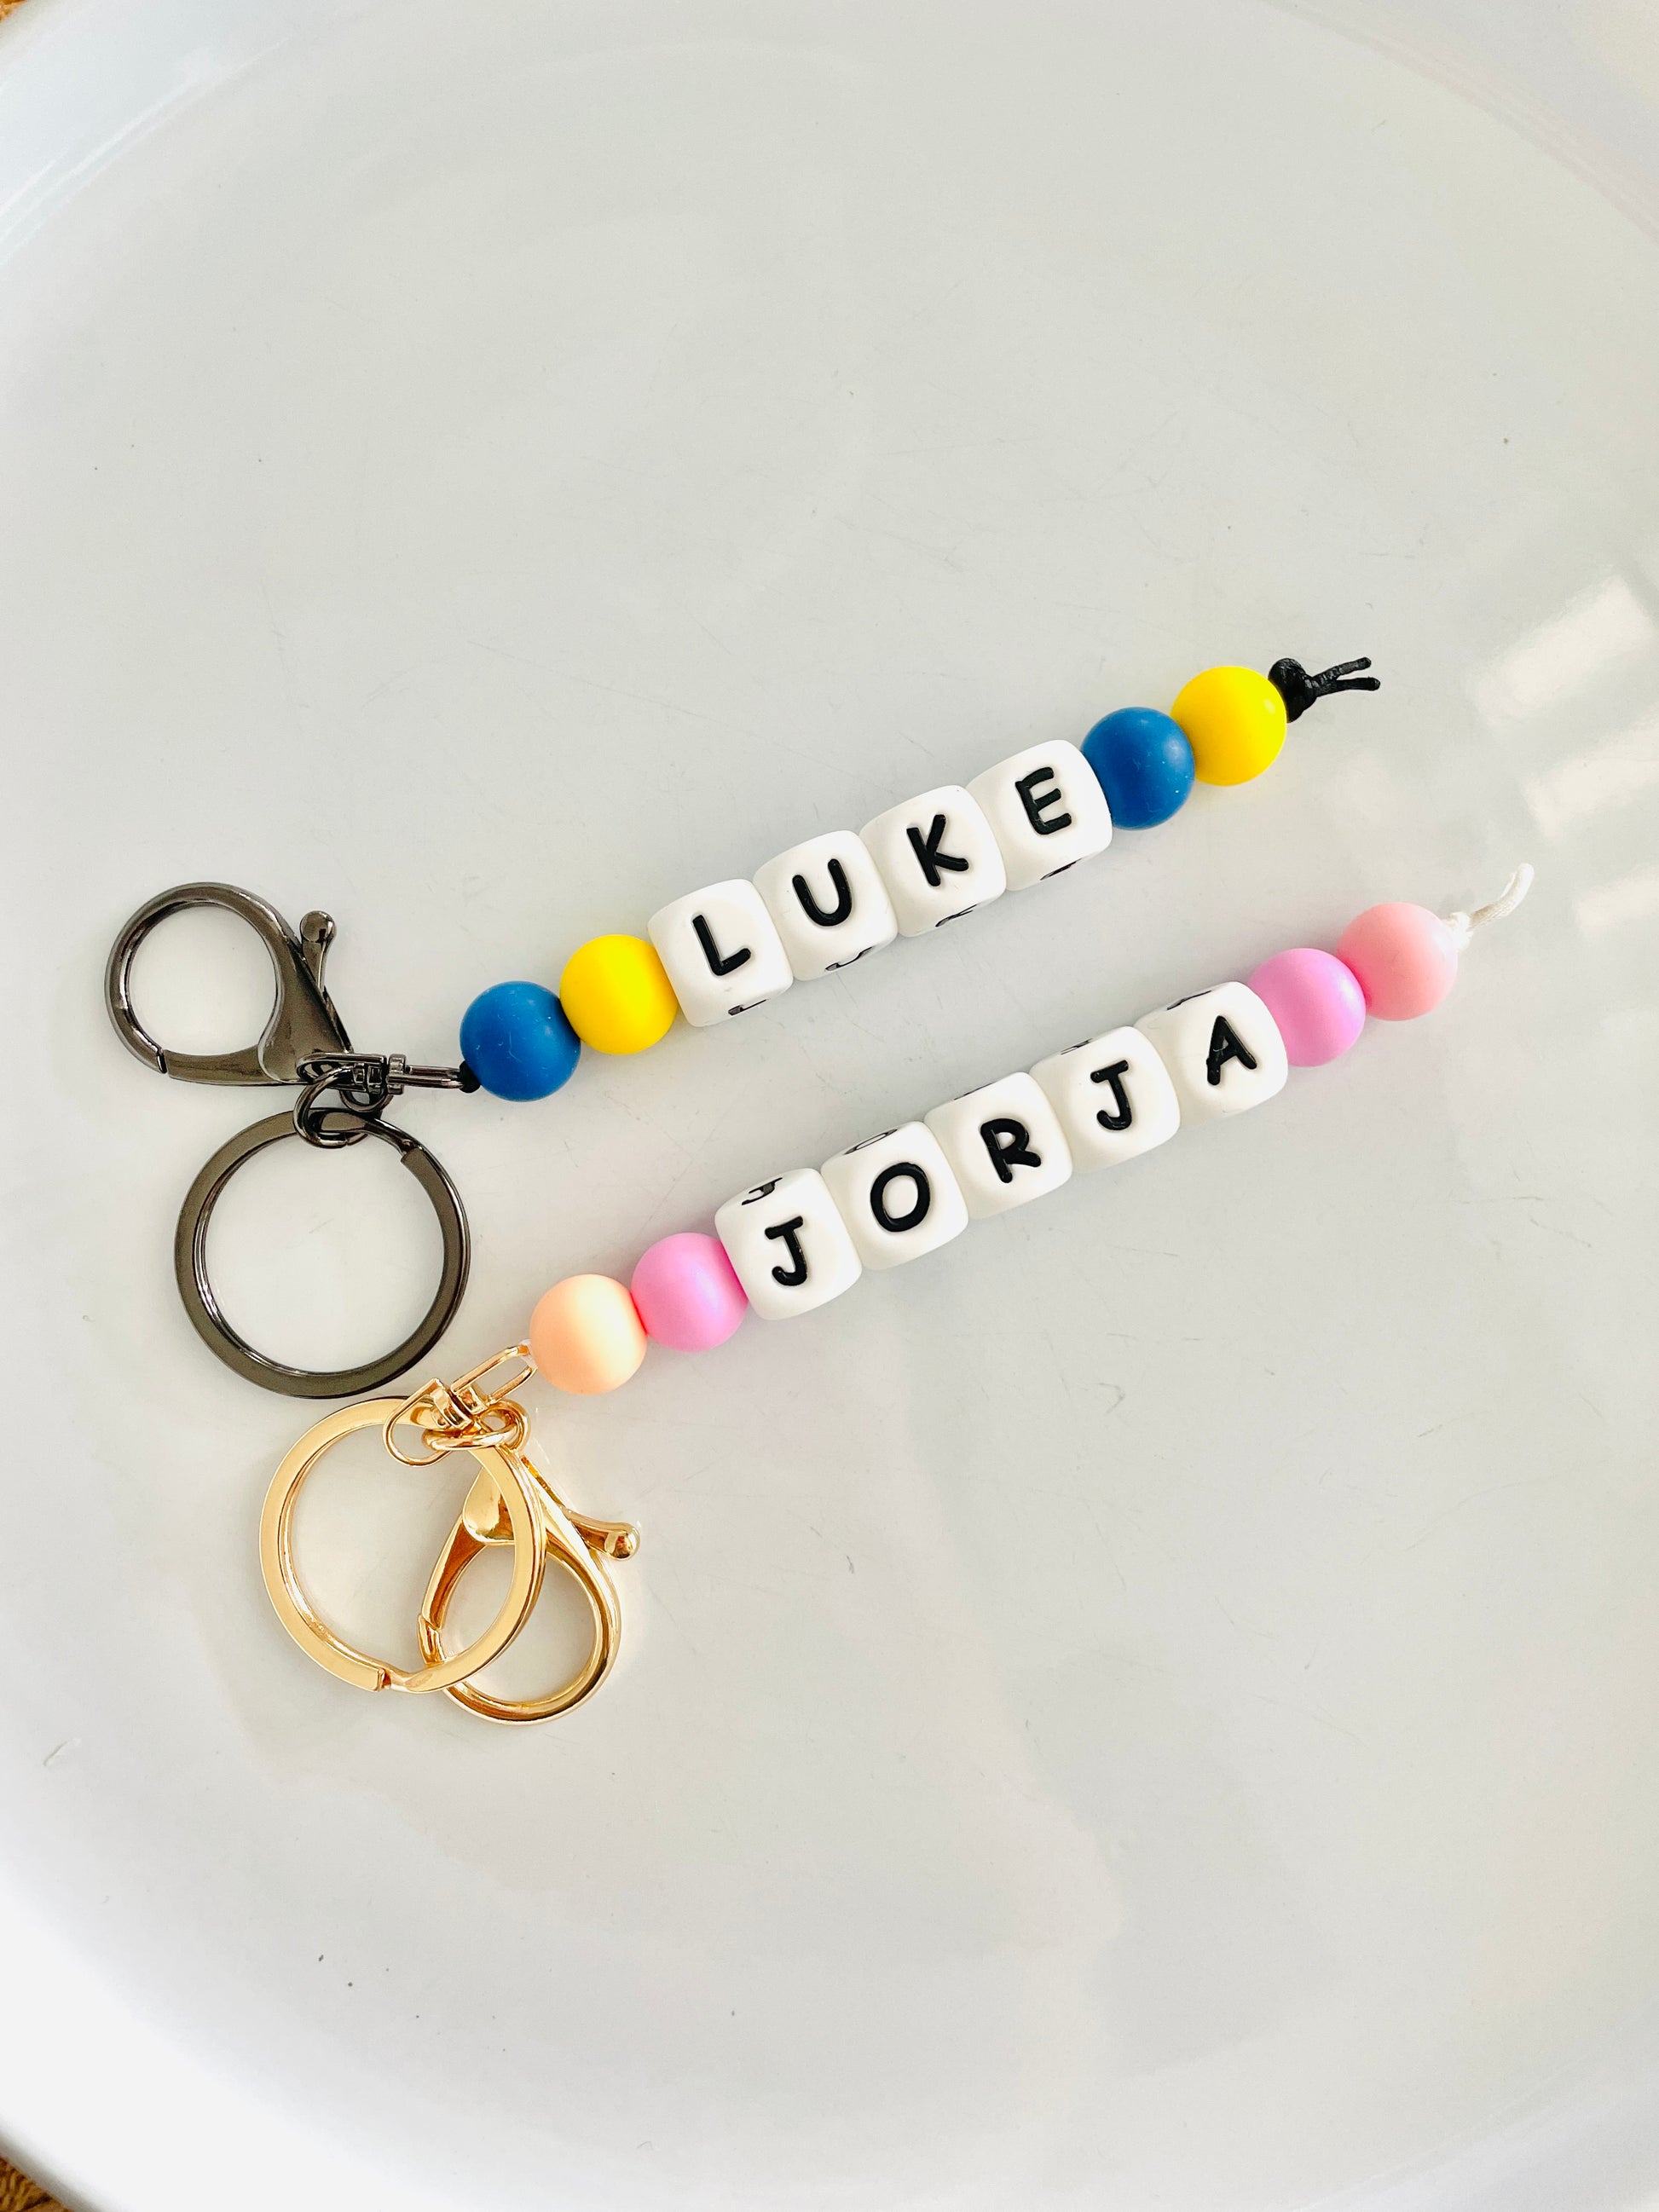 personalised beads & bubs classic bag tag keychain